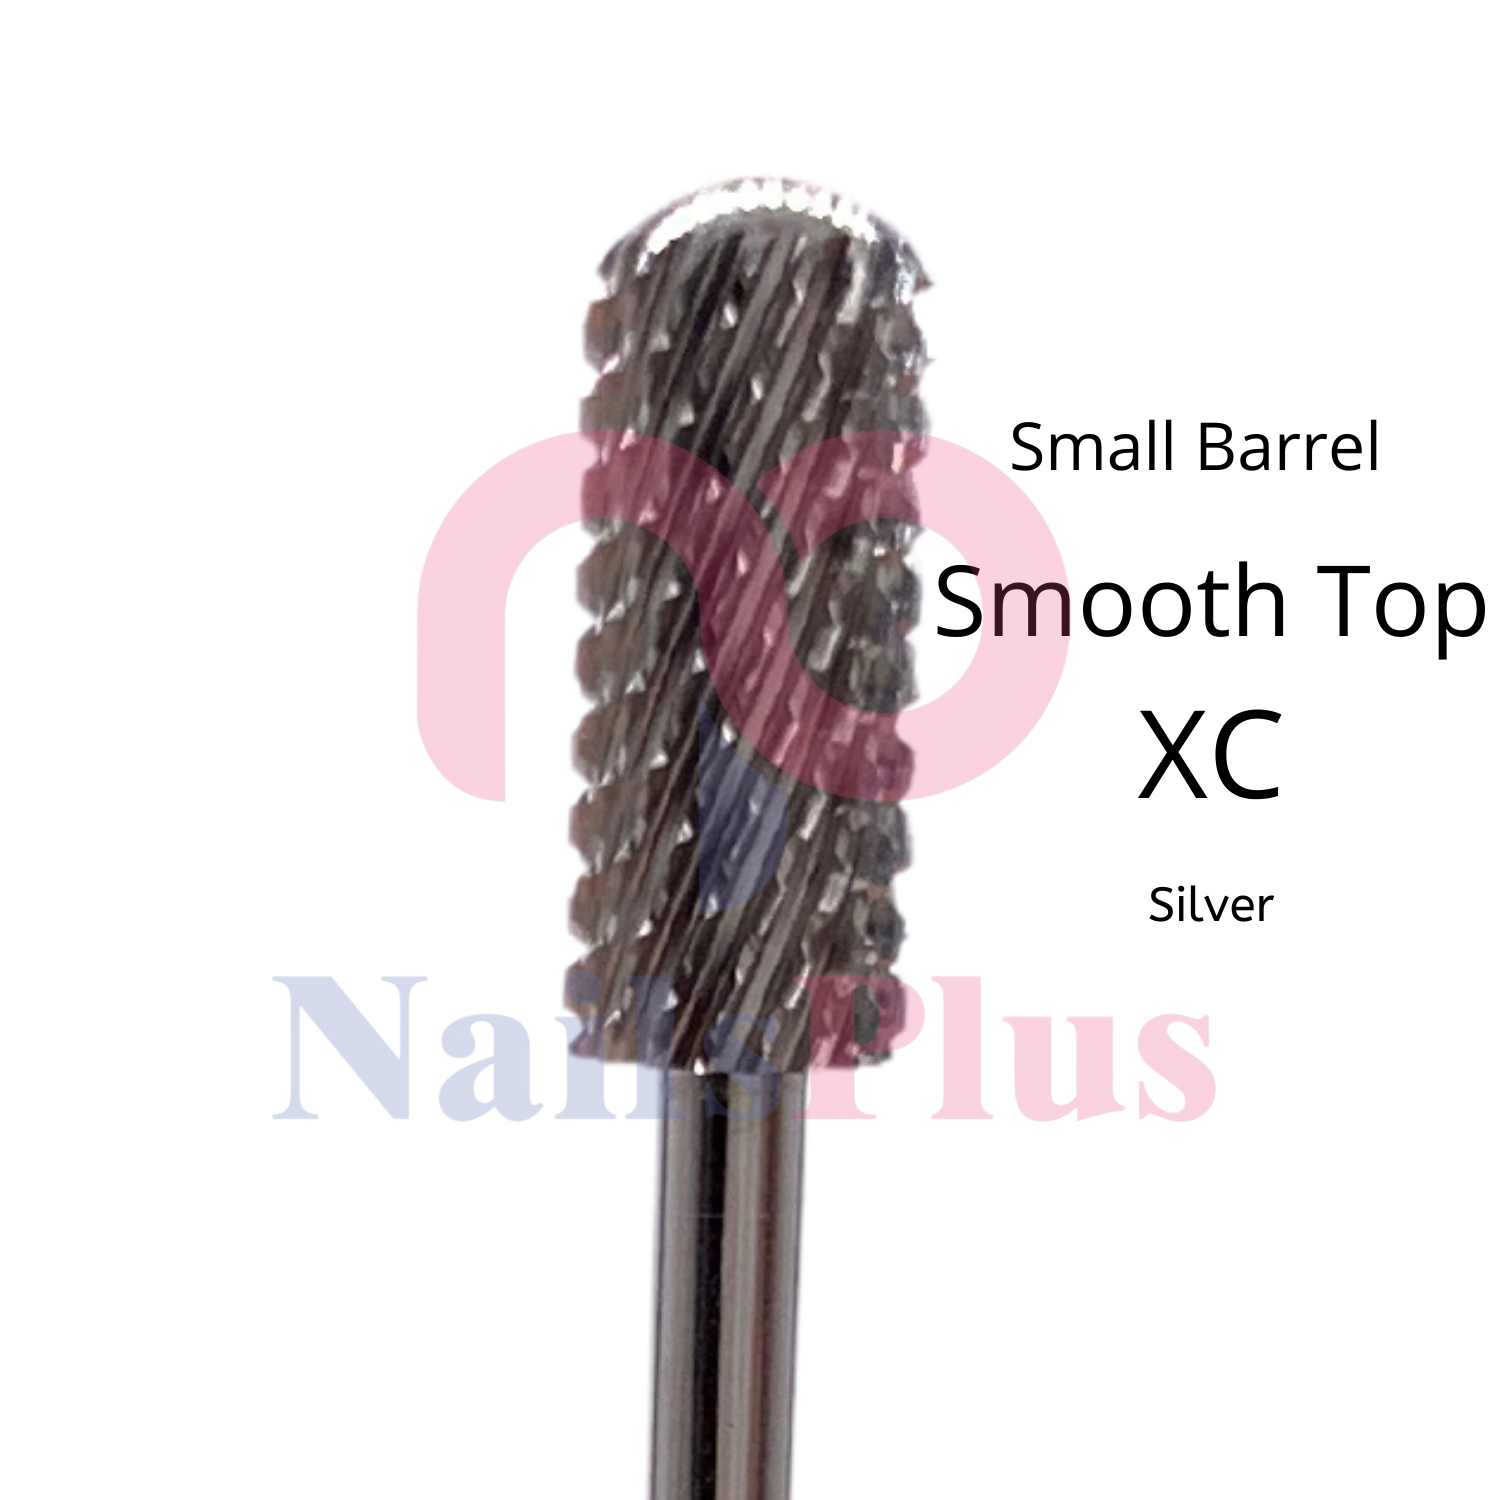 Small Barrel - Smooth Top  - XC - Silver